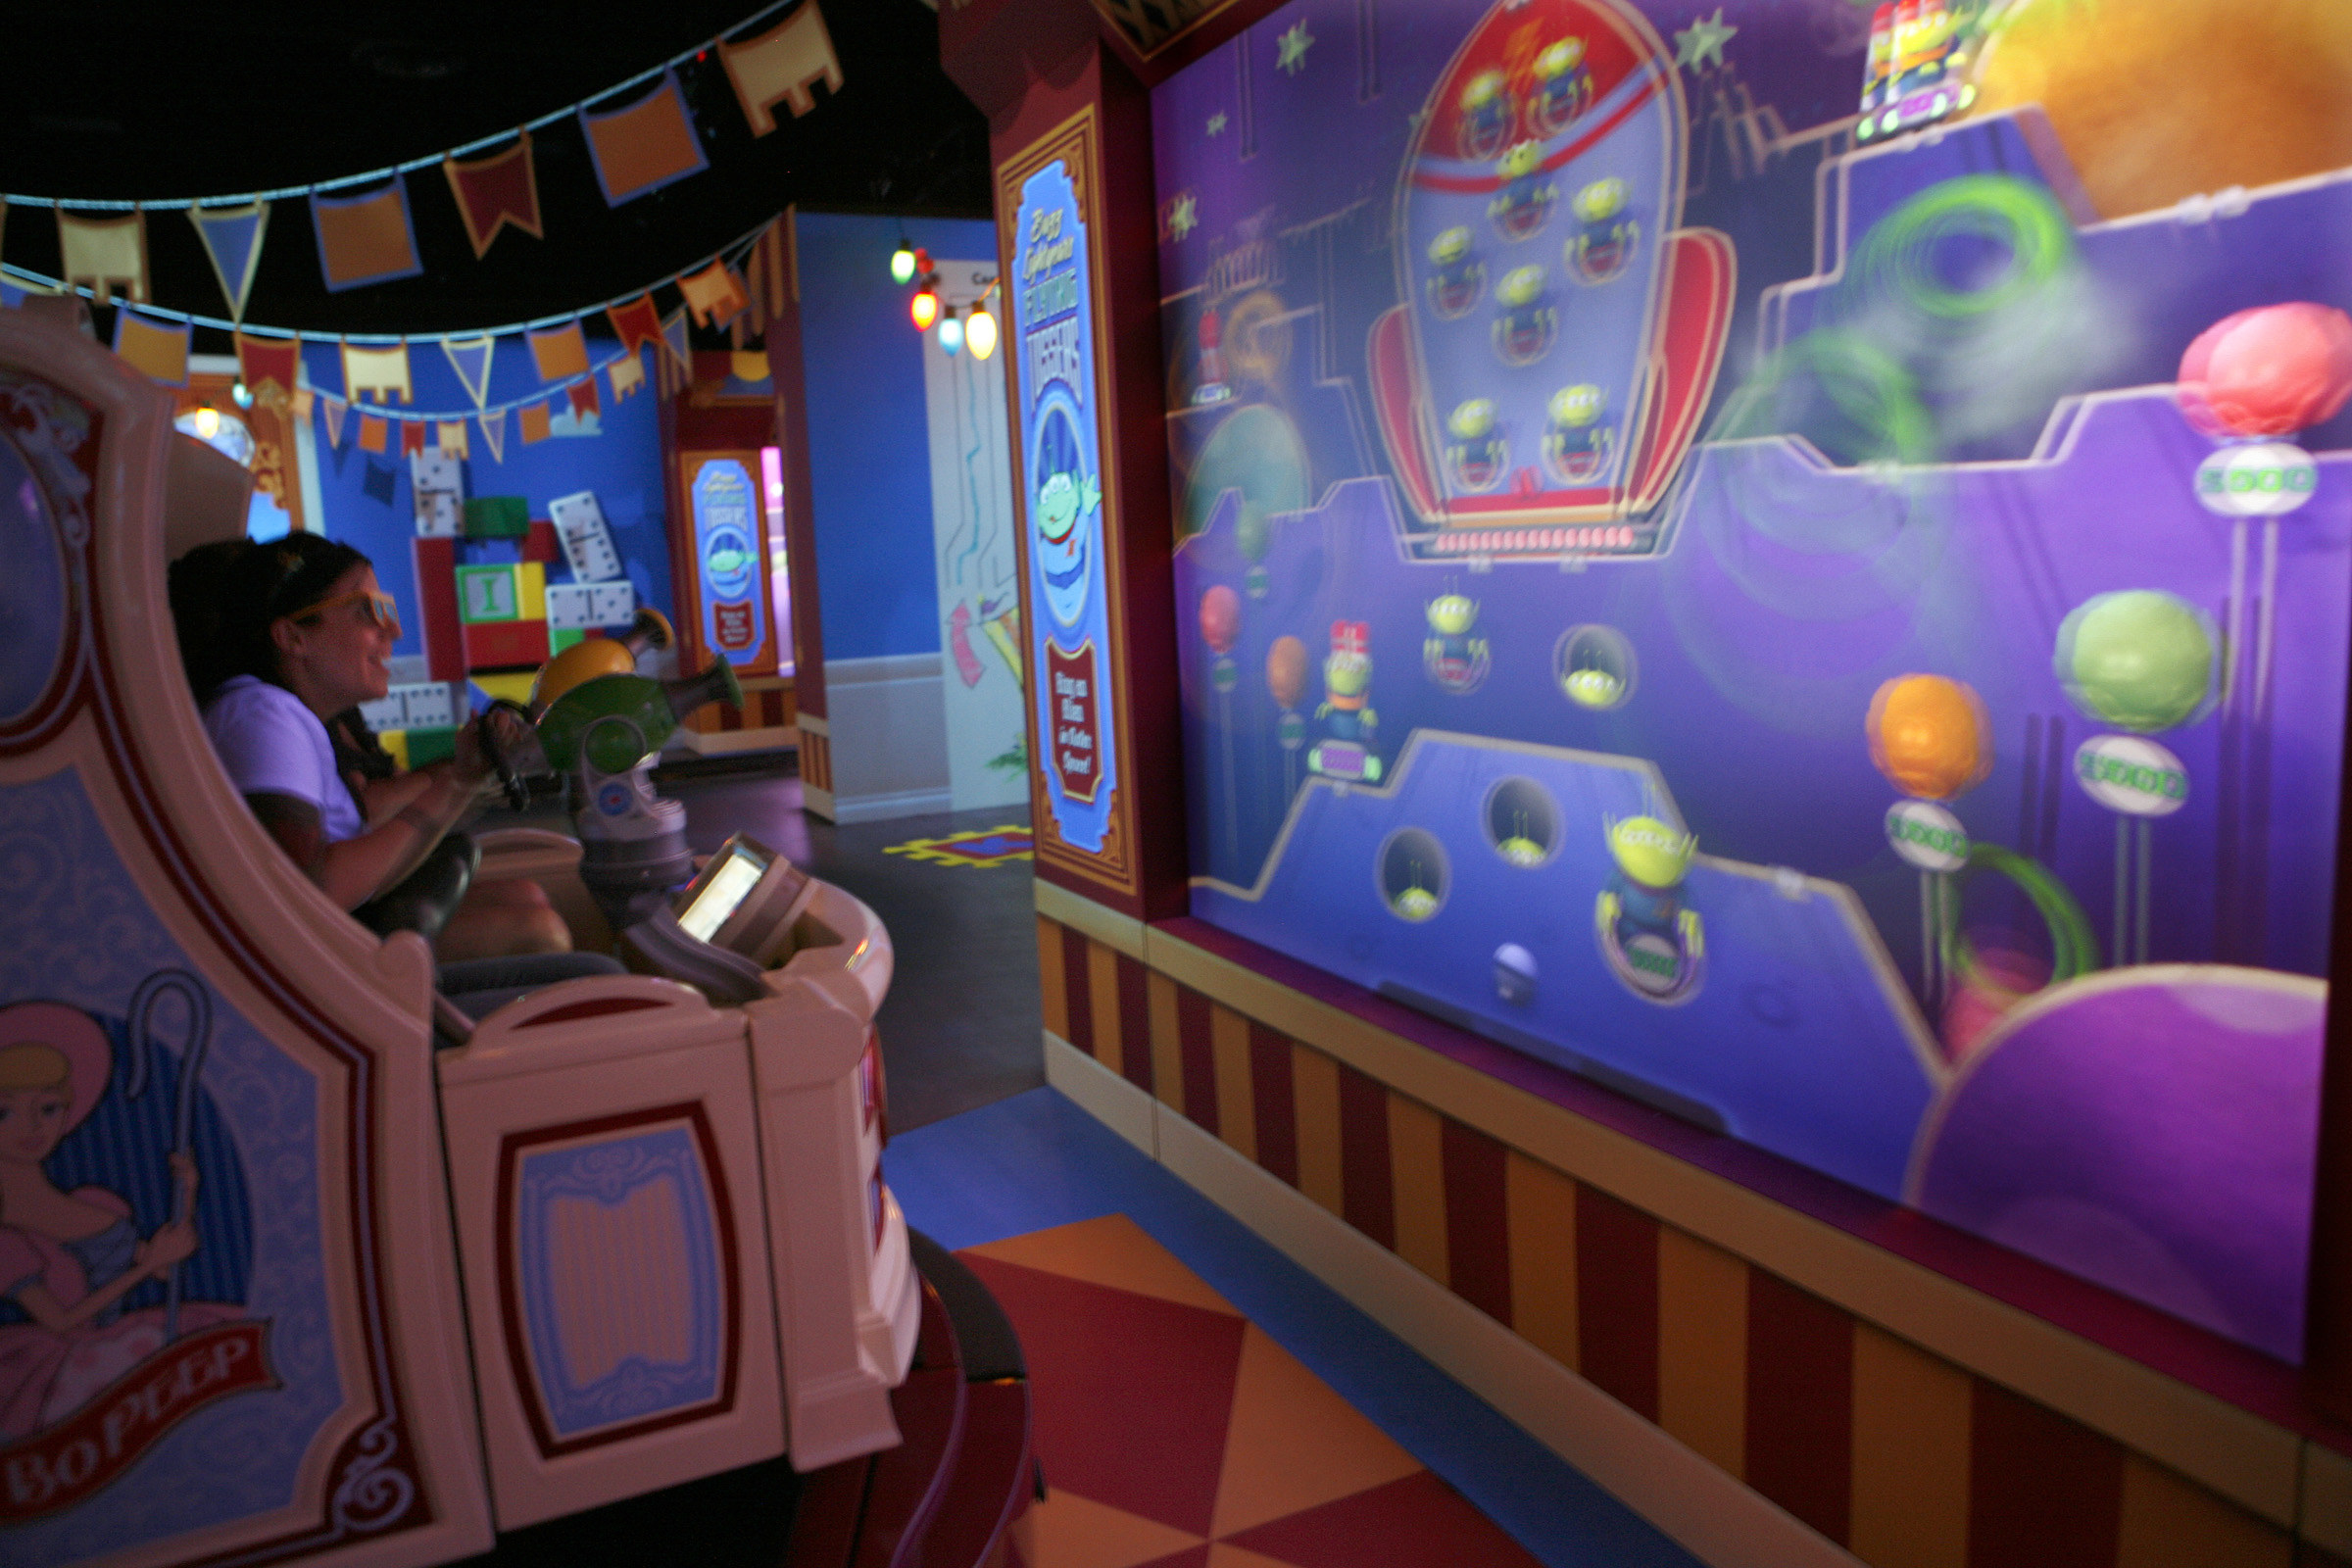 Inside of the Toy Story Mania! ride